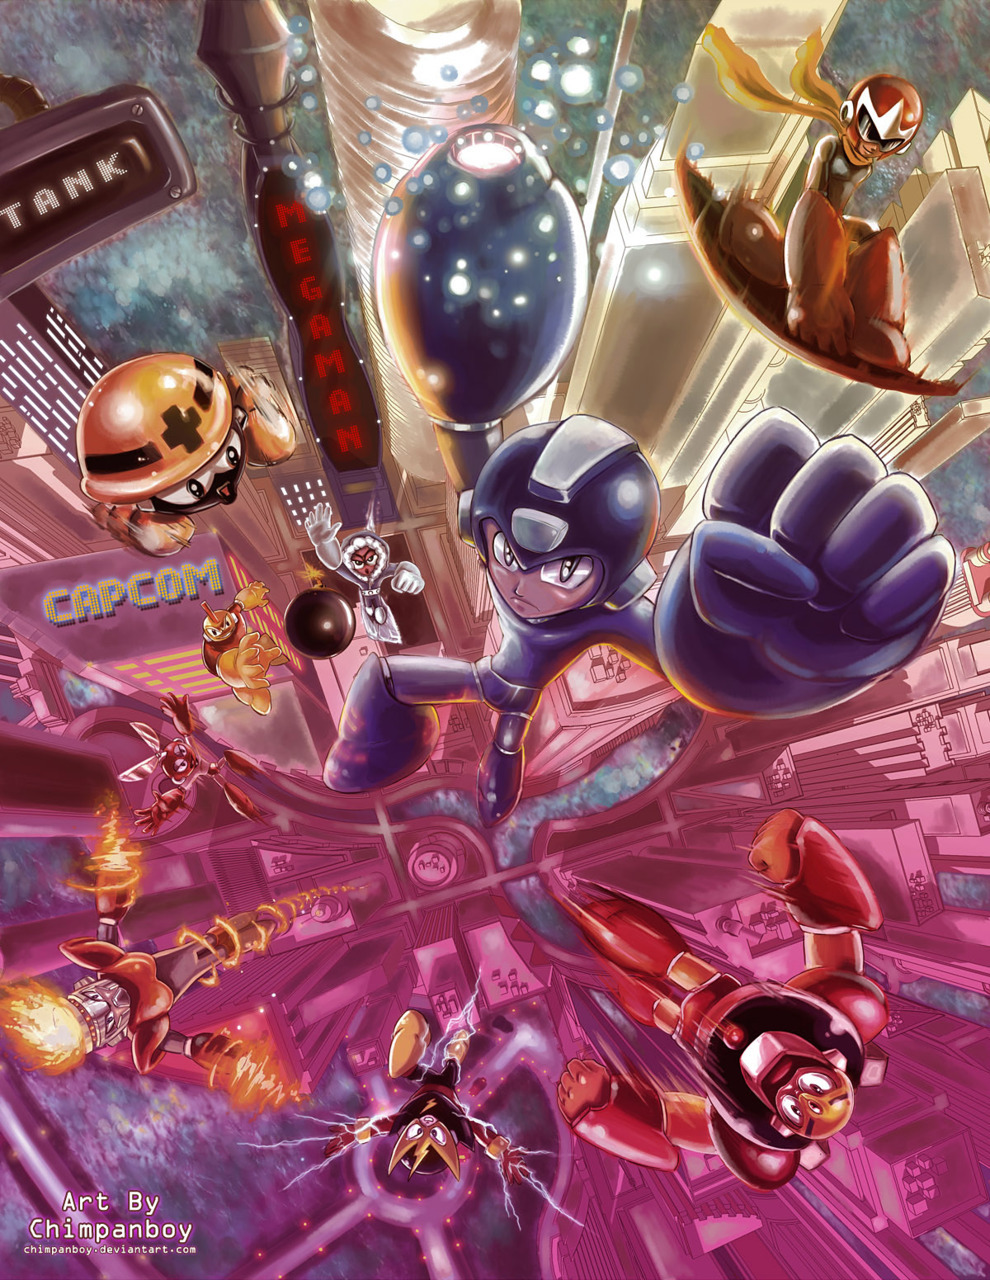 Mega Man and the gang are coming for you in this rad entry into UDON’s Mega Man Tribute Contest by Lucas Accornero.
More great Mega Man artwork can be found HERE!
Megaman Tribute by Lucas Accornero / Chimpanboy